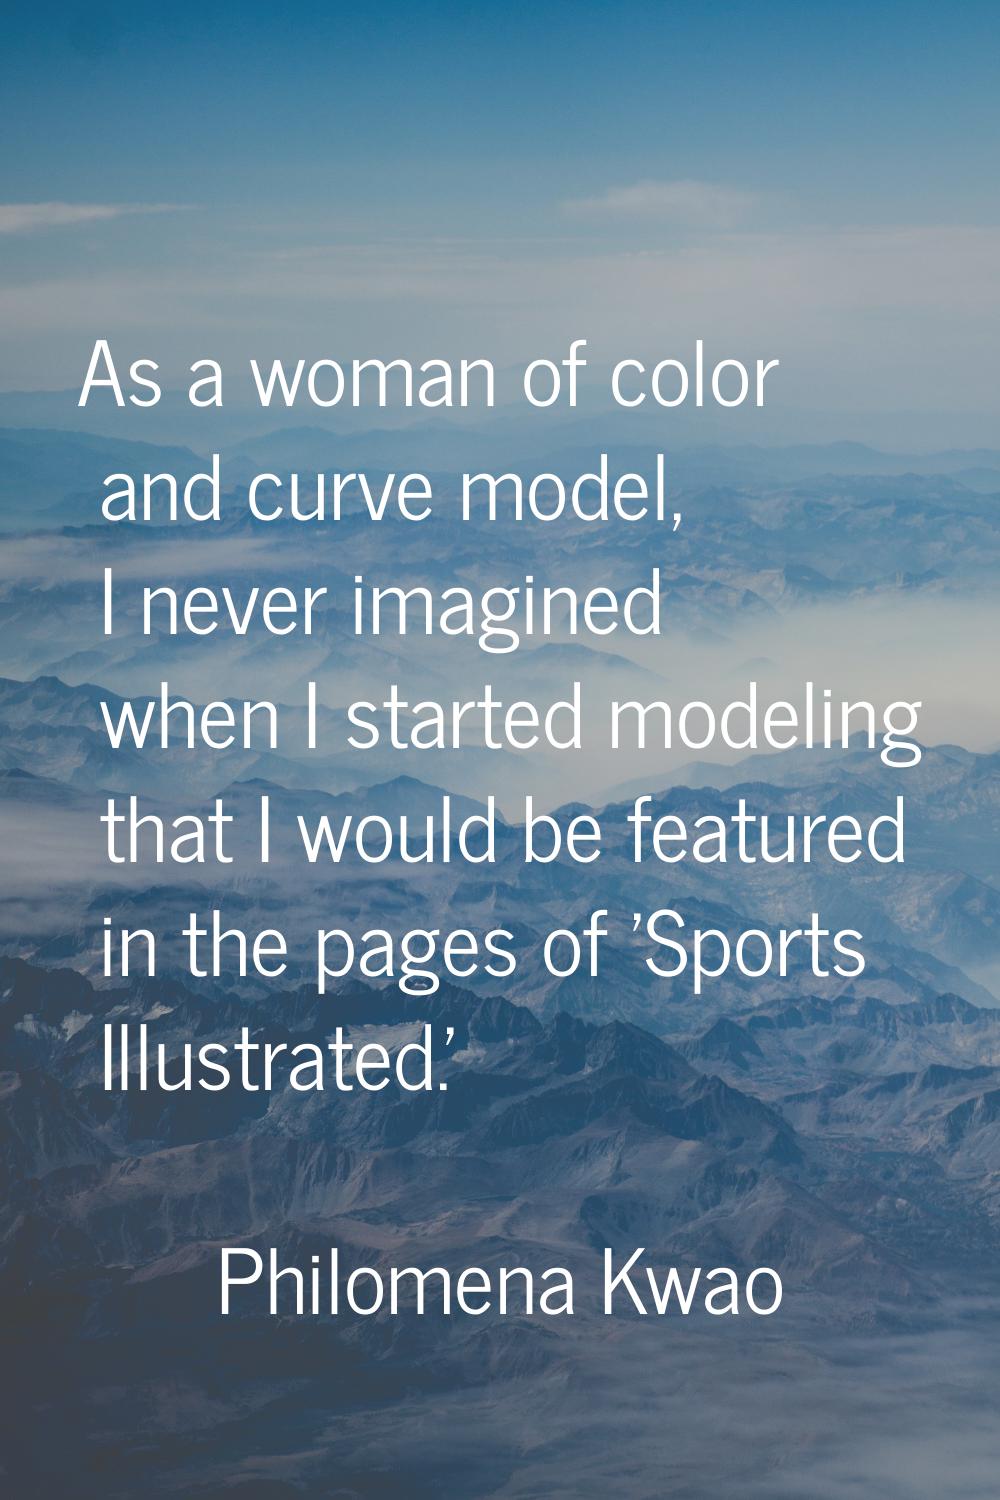 As a woman of color and curve model, I never imagined when I started modeling that I would be featu